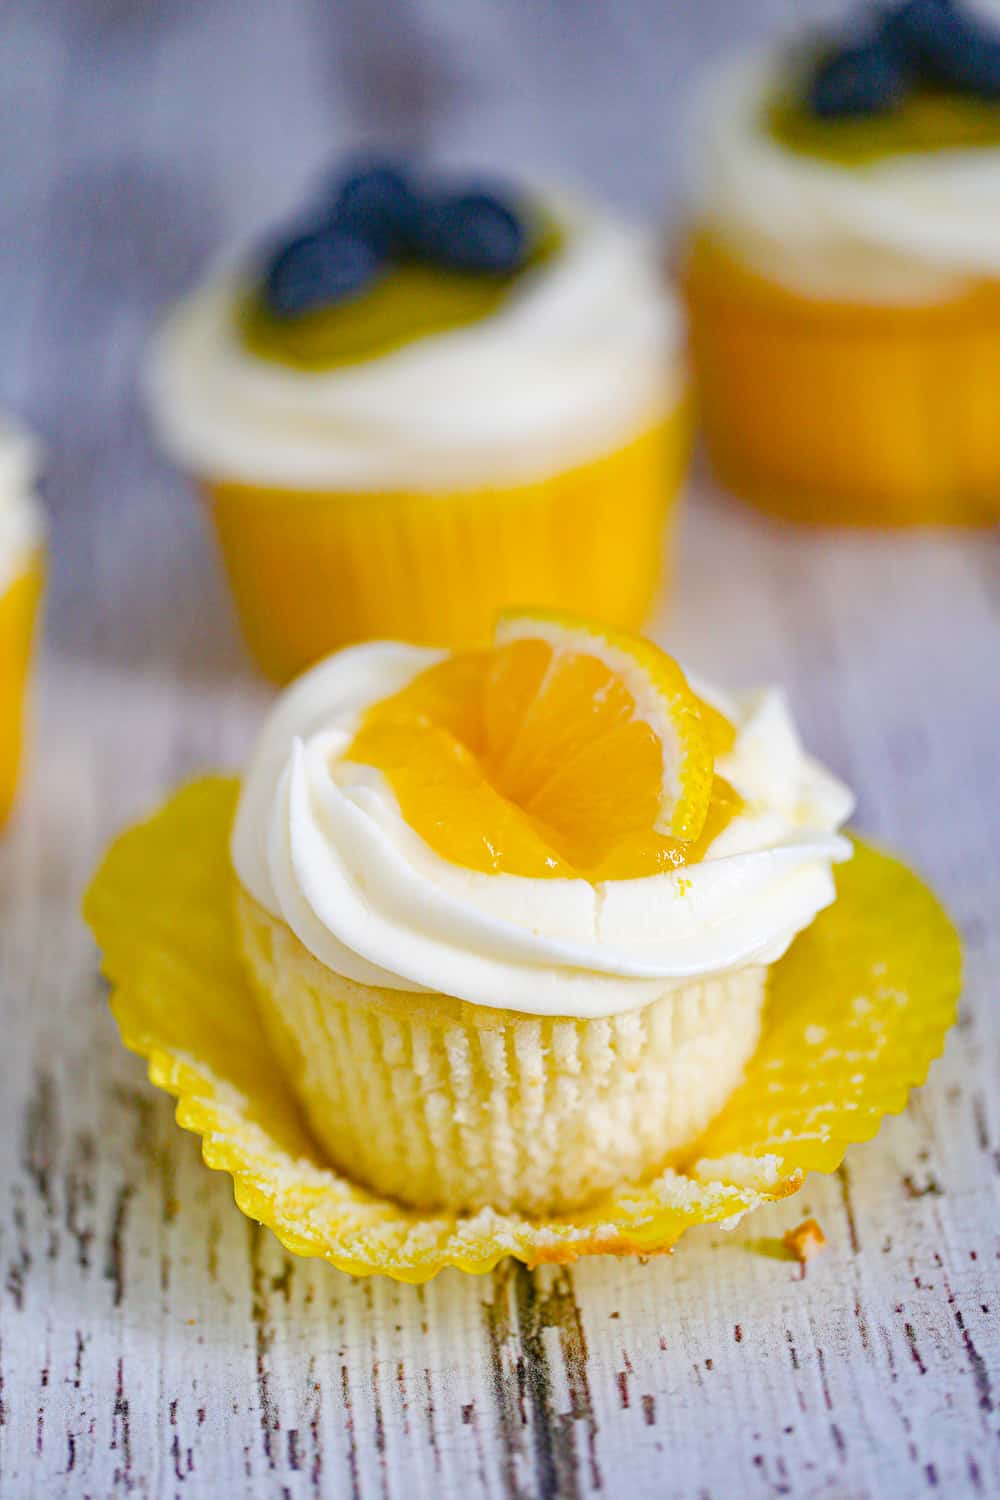 Triple Lemon filled Cupcakes recipe cream cheese frosting